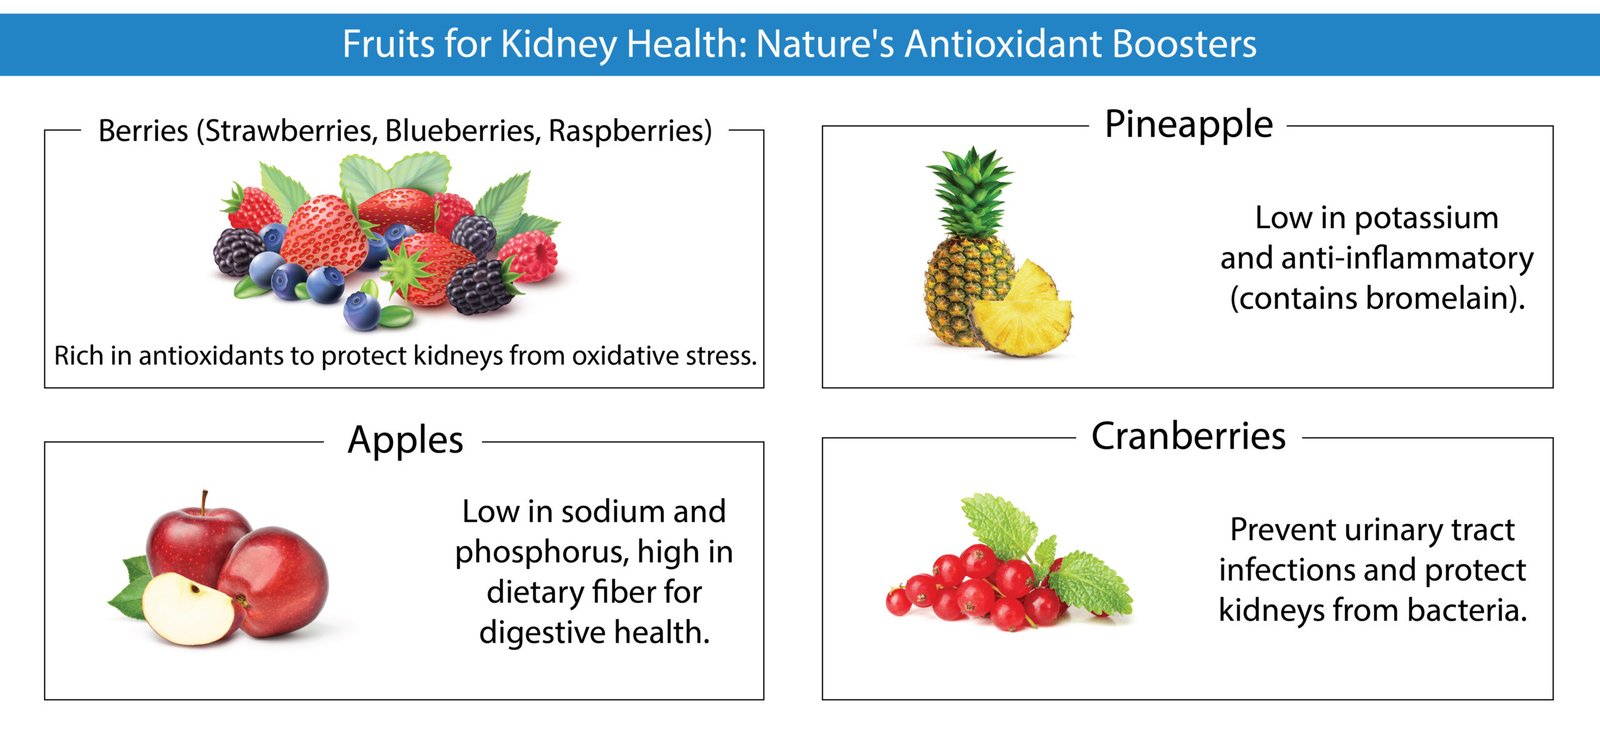 Top Fruits for Kidney Health